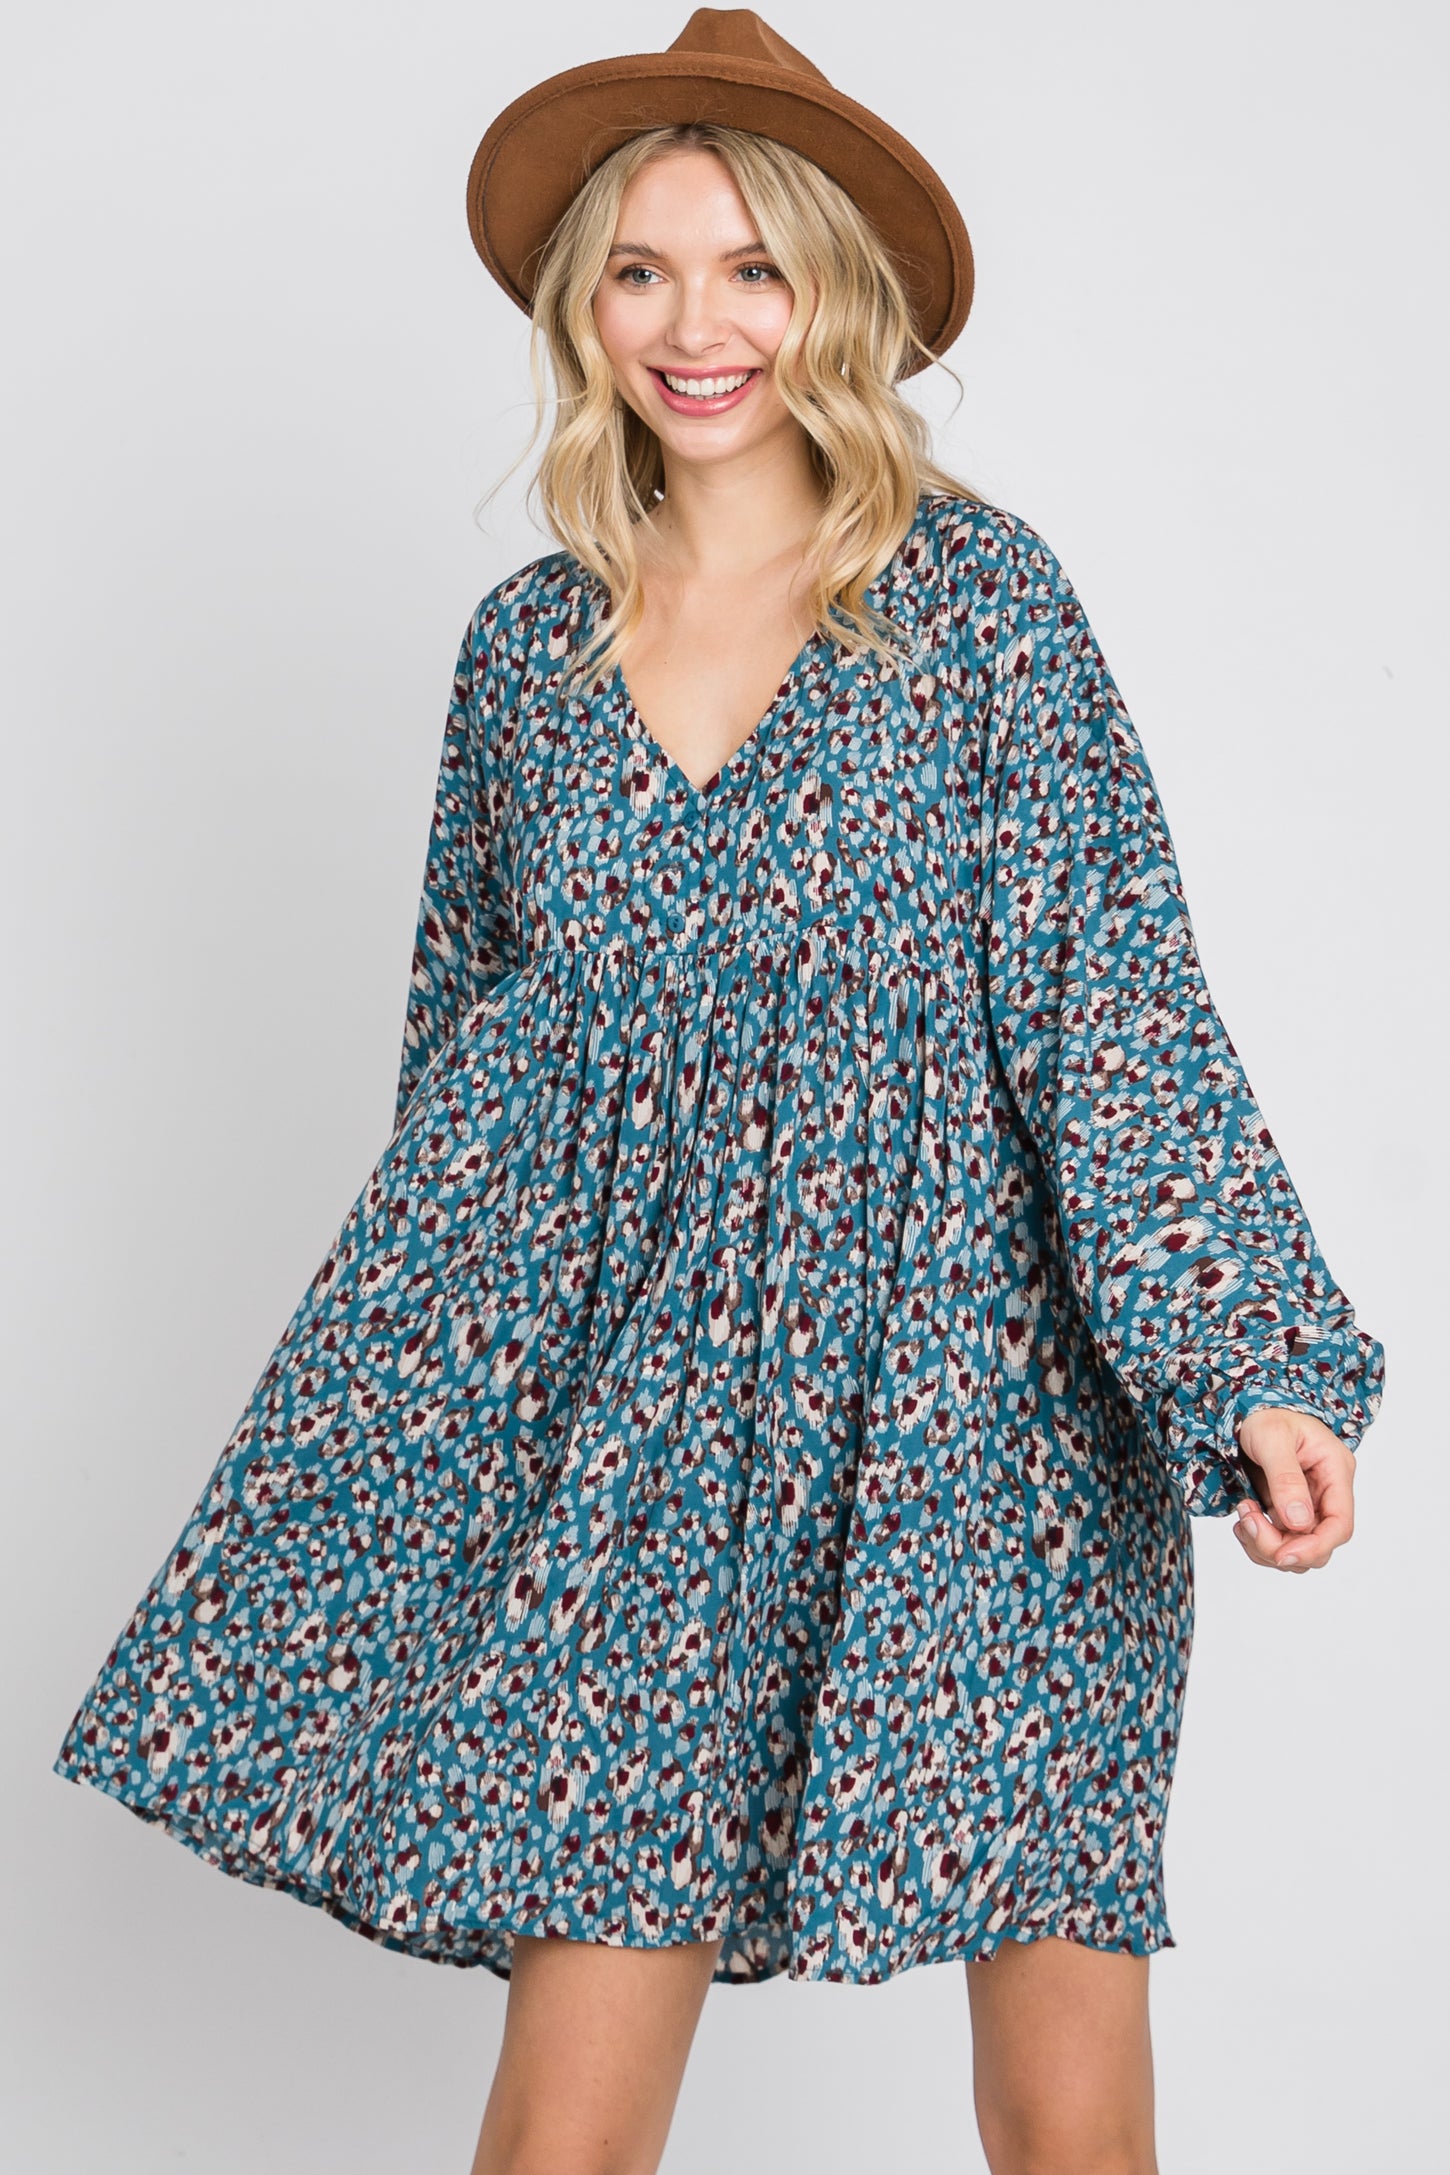 Teal Printed Button Front Long Sleeve Dress